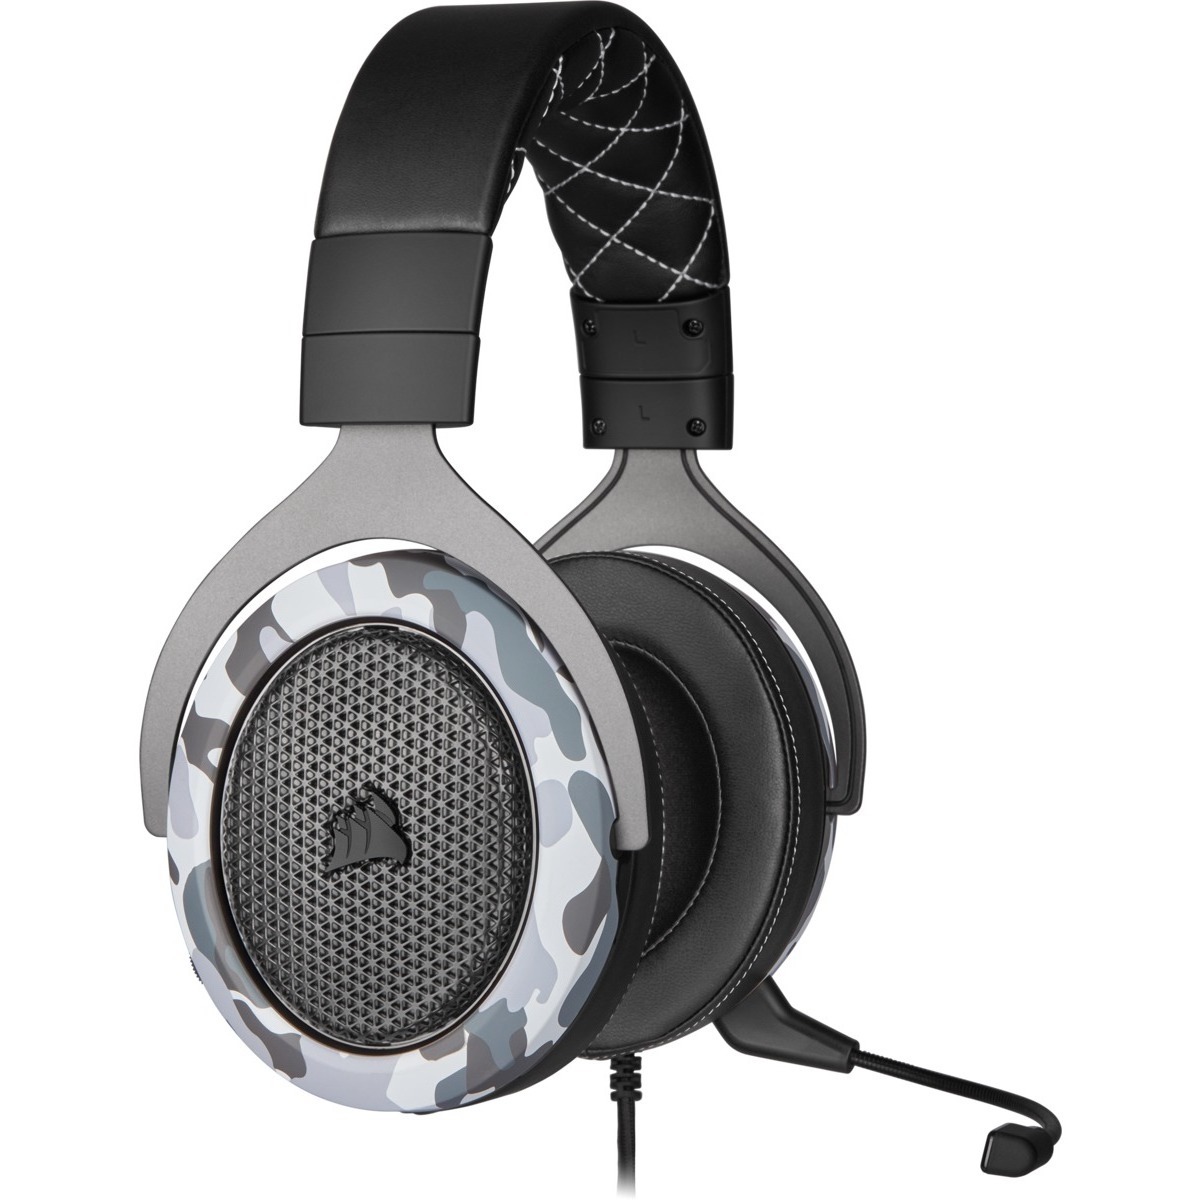 Bass Headset HAPTIC with Haptic Stereo HS60 CA-9011225-NA: Corsair Gaming Headsets/Earsets